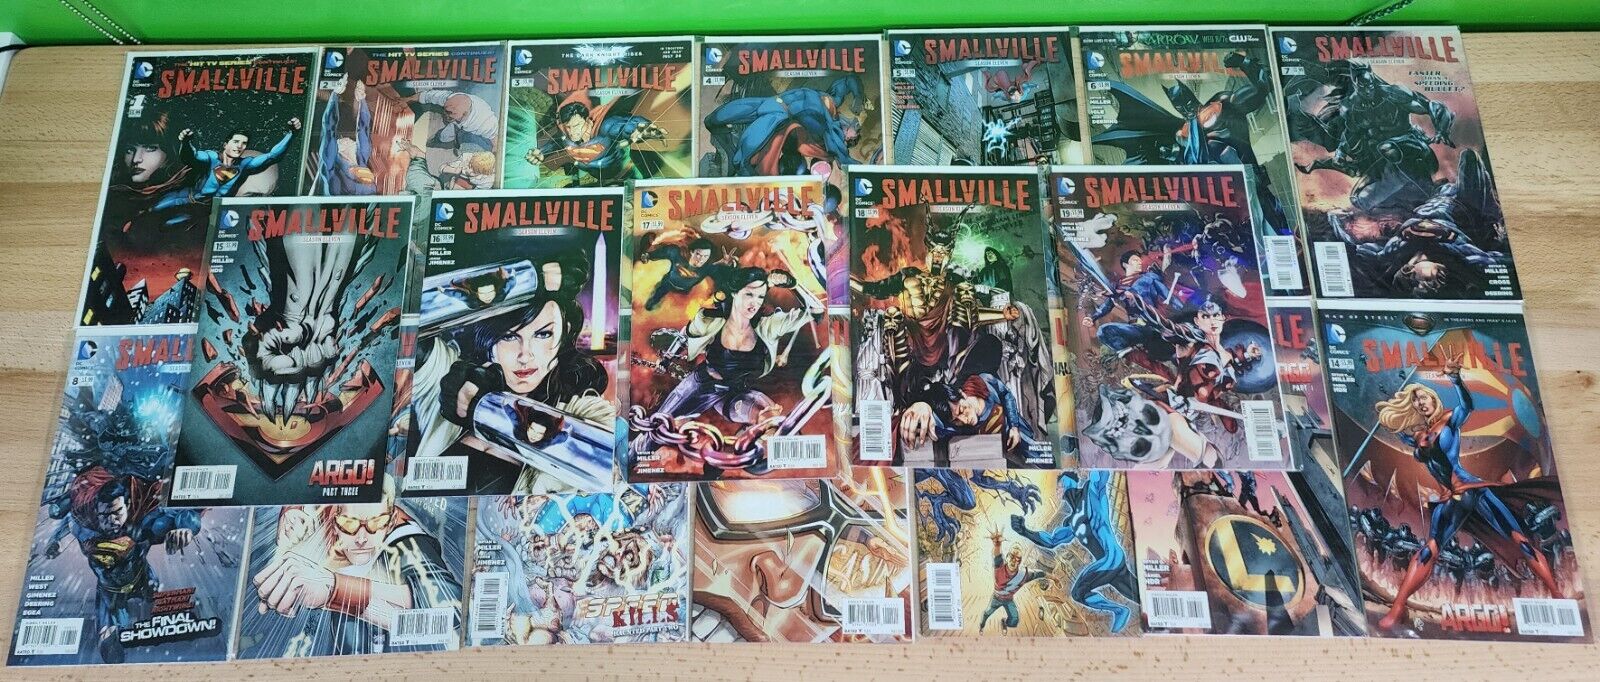 SMALLVILLE SEASON 11 #1-19 COMIC COMPLETE FULL SET Bagged And Boarded TV Show DC